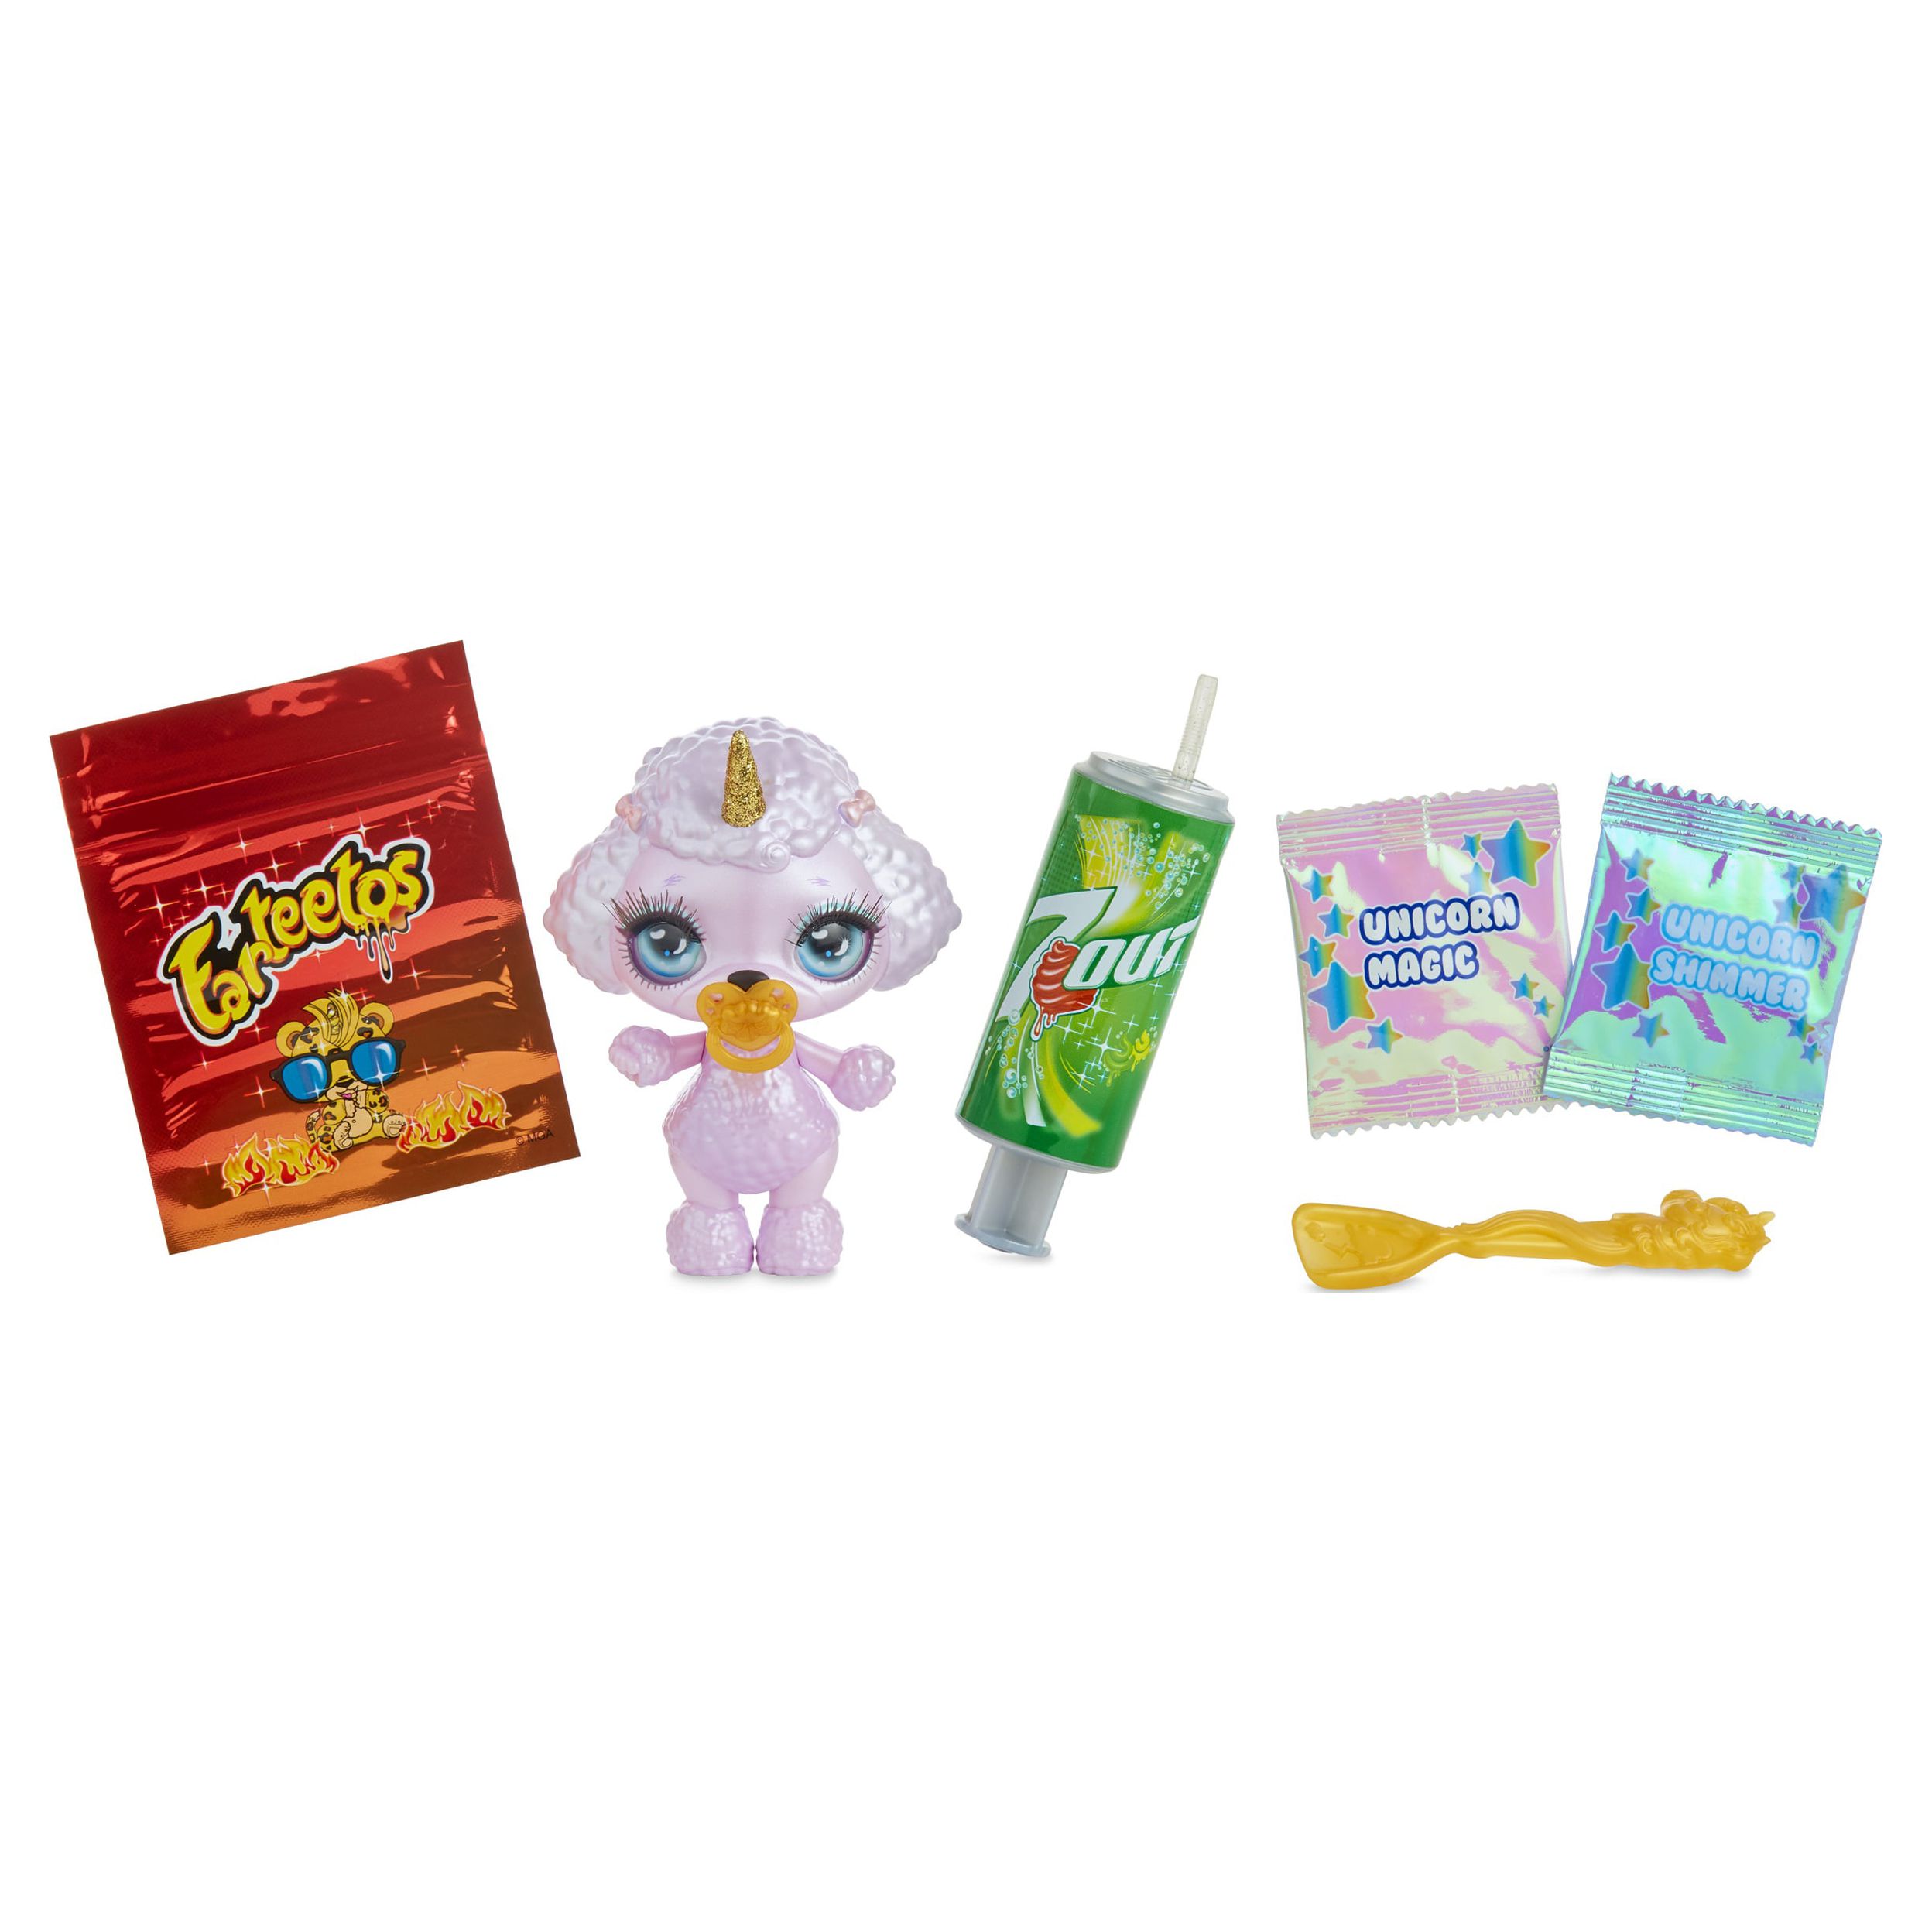 Poopsie Sparkly Critters 6" Figures That Magically Poop or Spit Slime - image 5 of 7